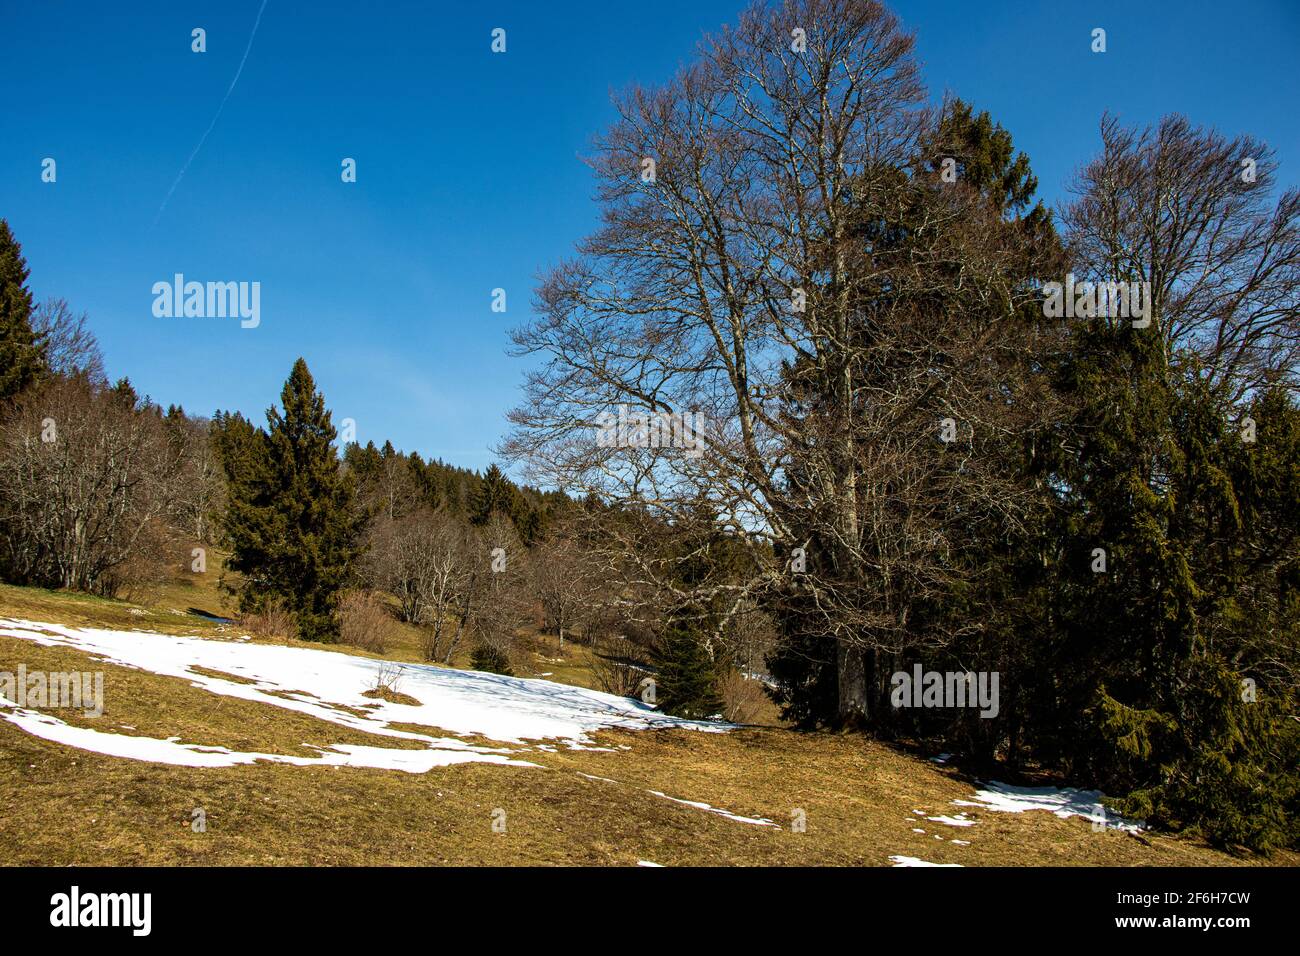 Meadow and trees and snowy patches in spring. Prés-d-Orvin, Switzerland. Stock Photo